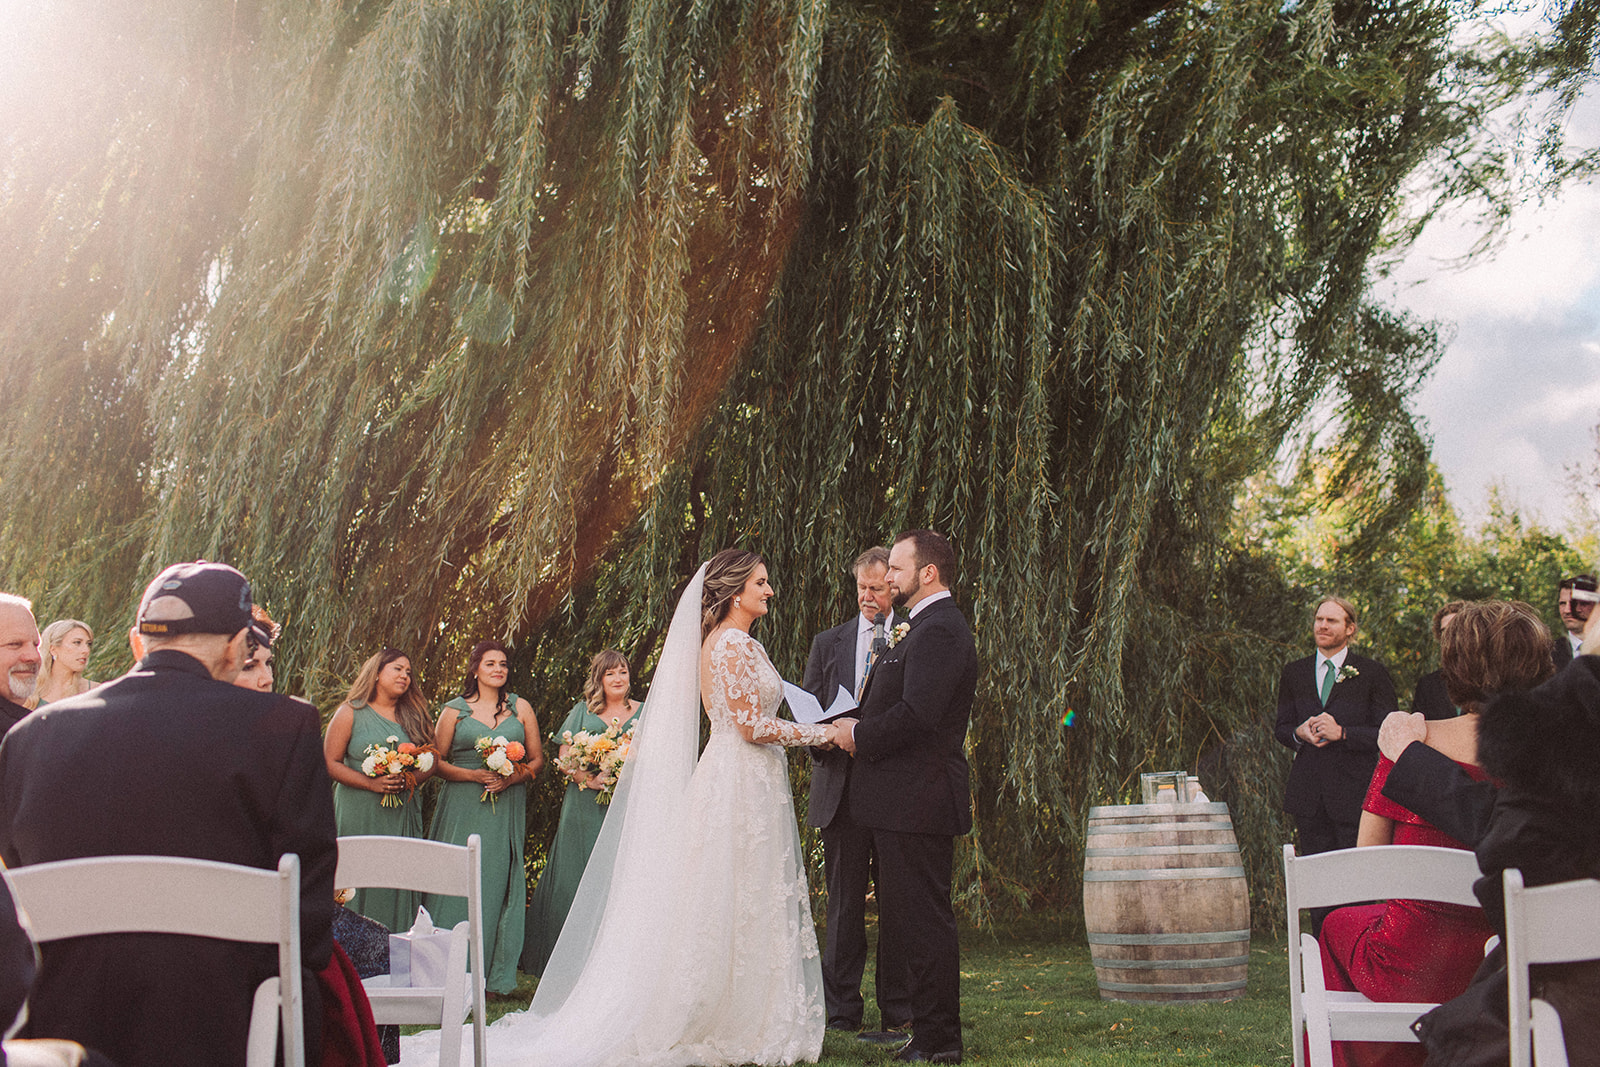 A wedding ceremony under a willow tree at Northern Michigan's gorgeous Aurora Cellars